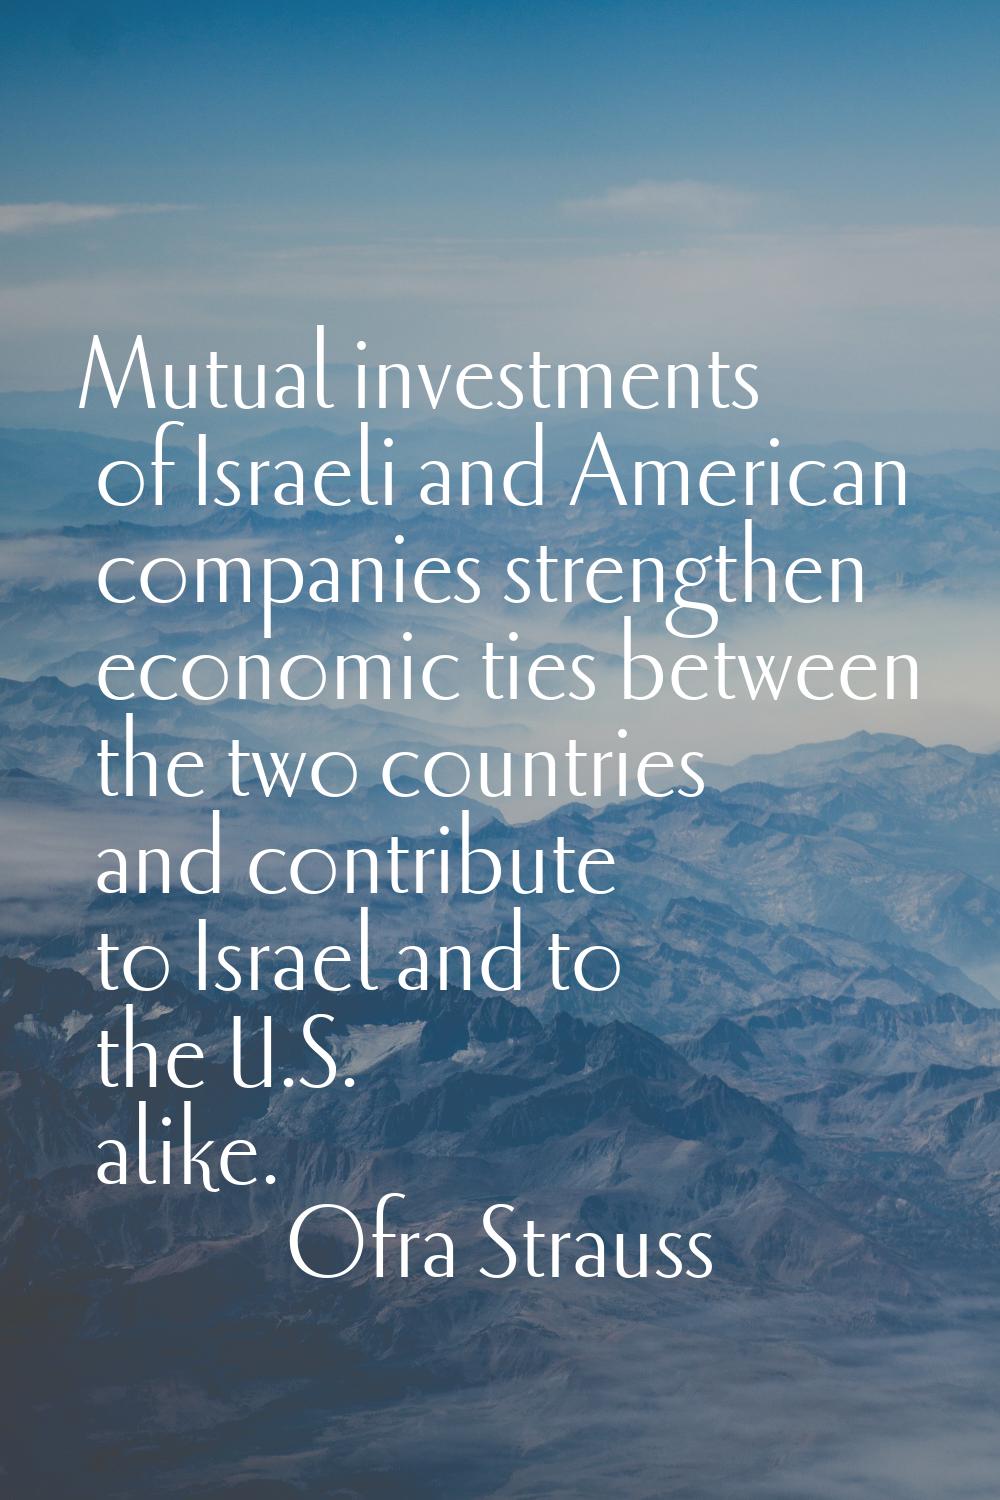 Mutual investments of Israeli and American companies strengthen economic ties between the two count